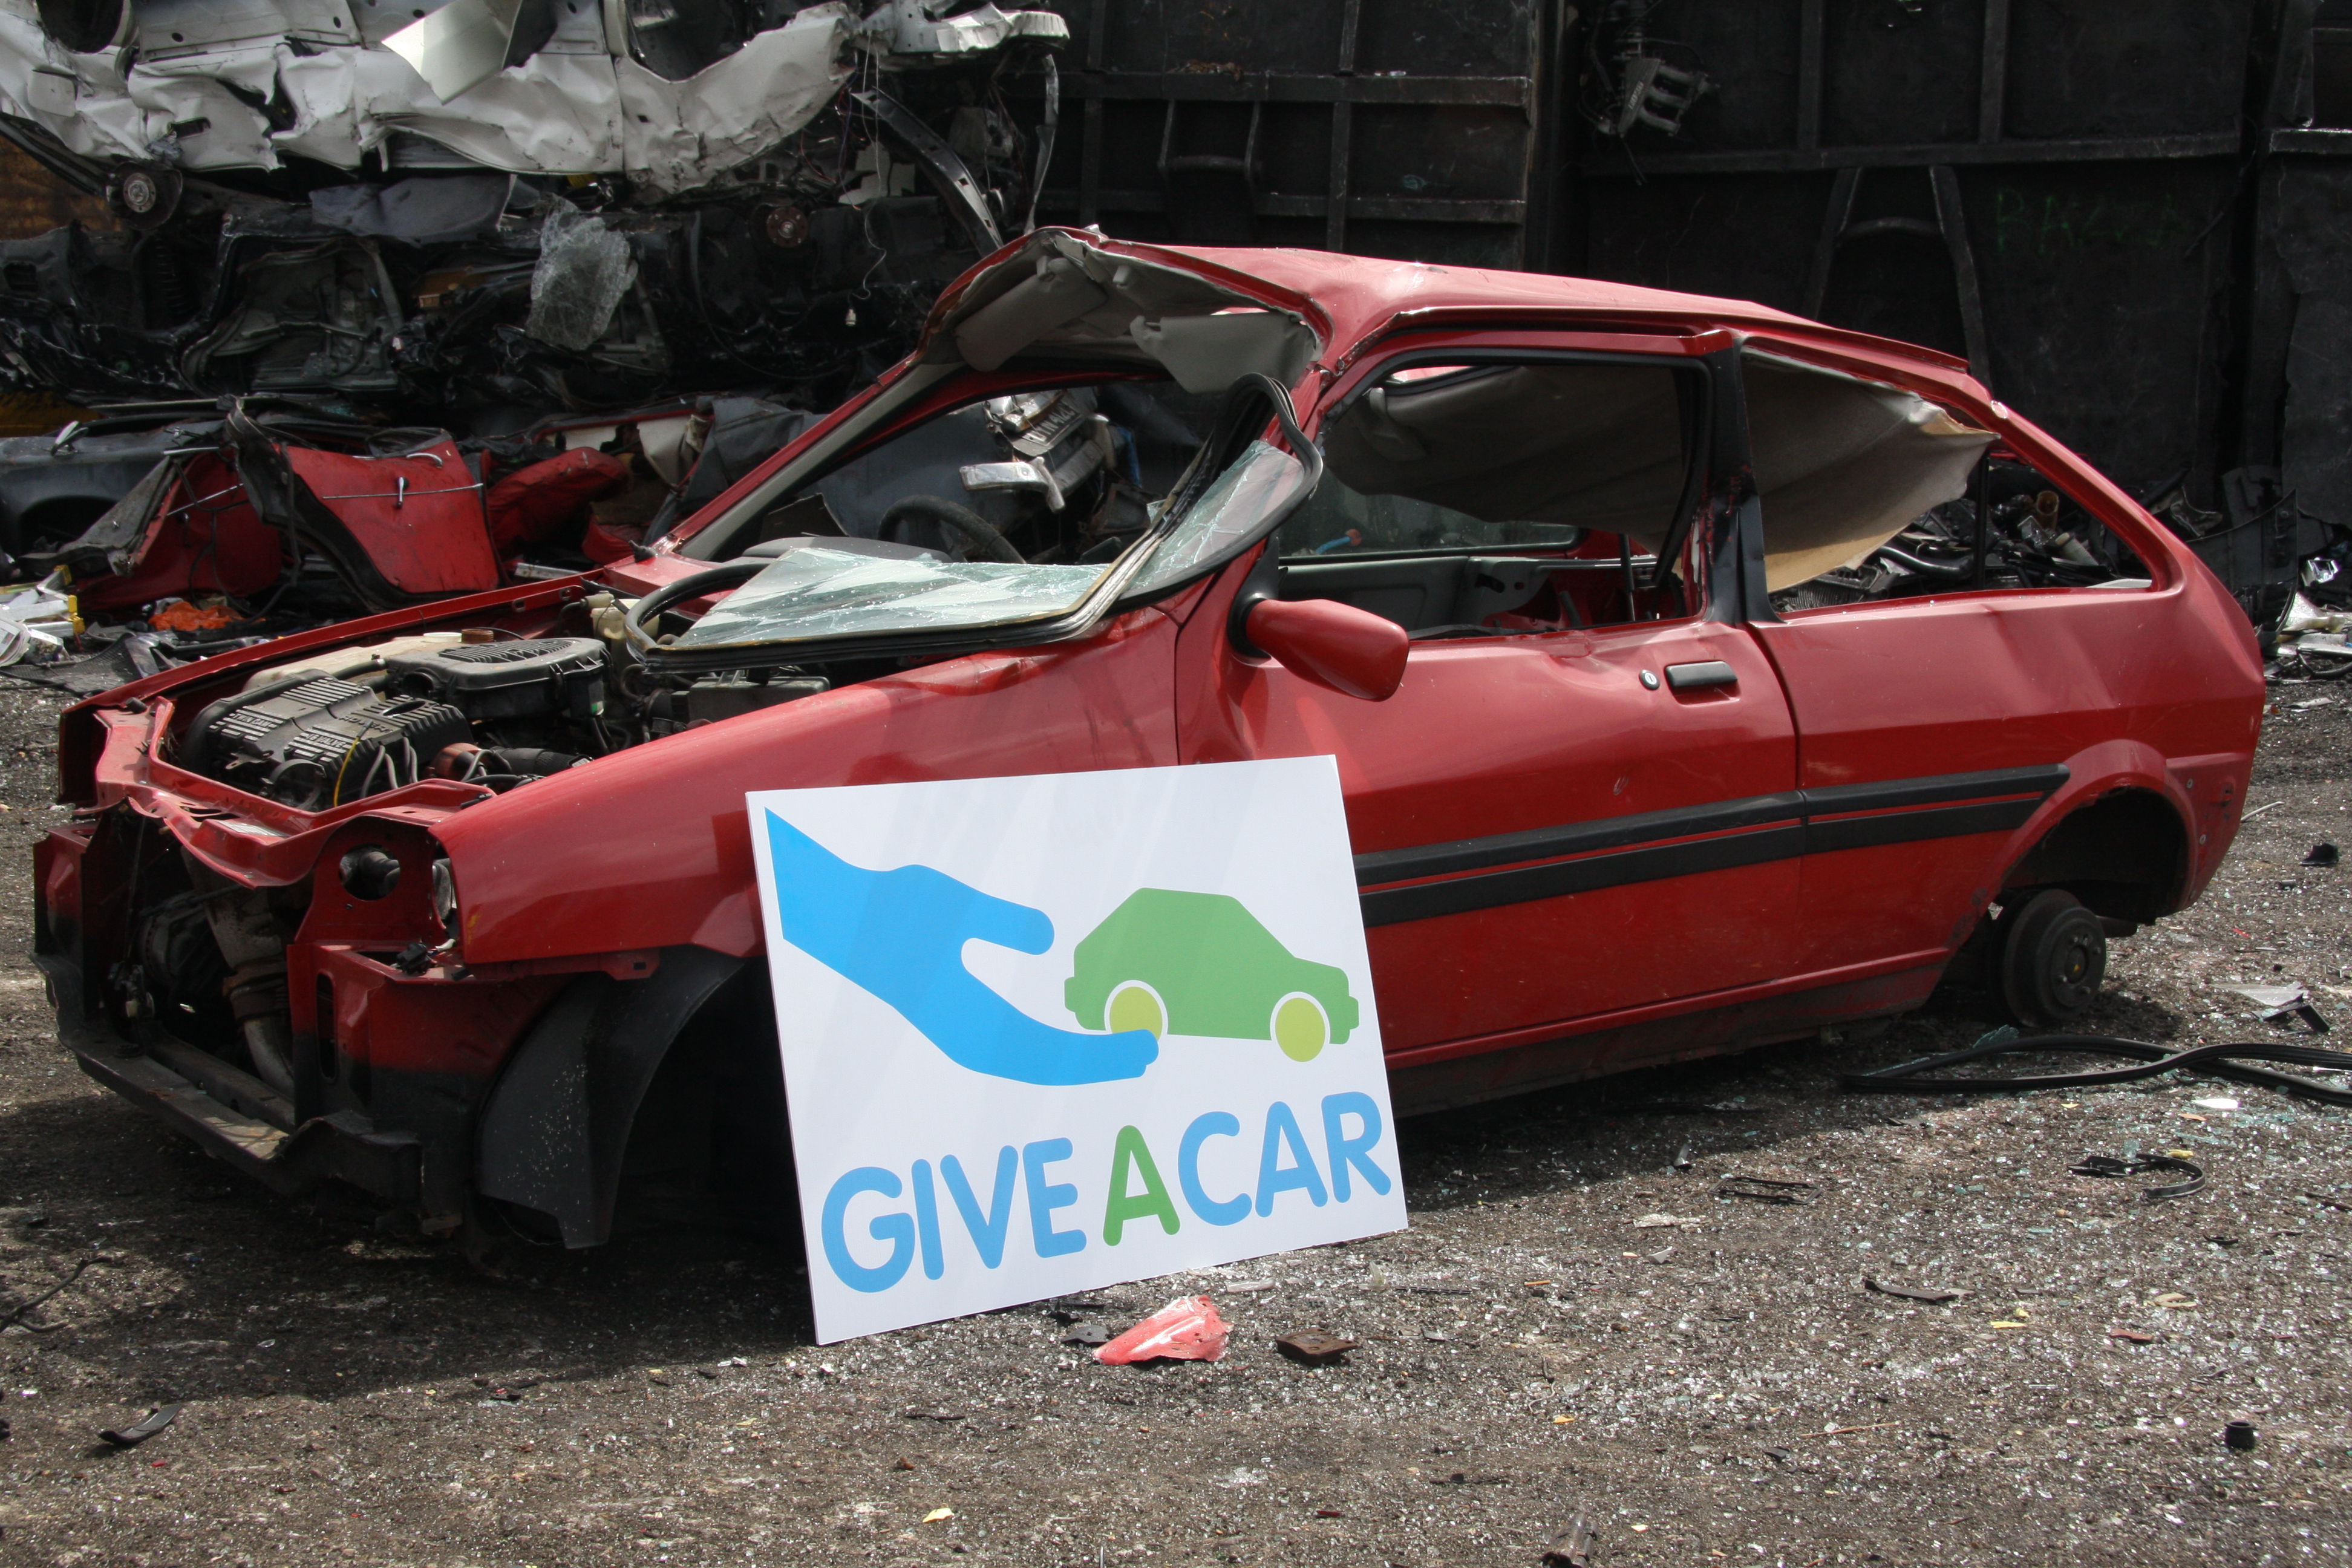 Turn your old banger into cash for St Richard's Hospice